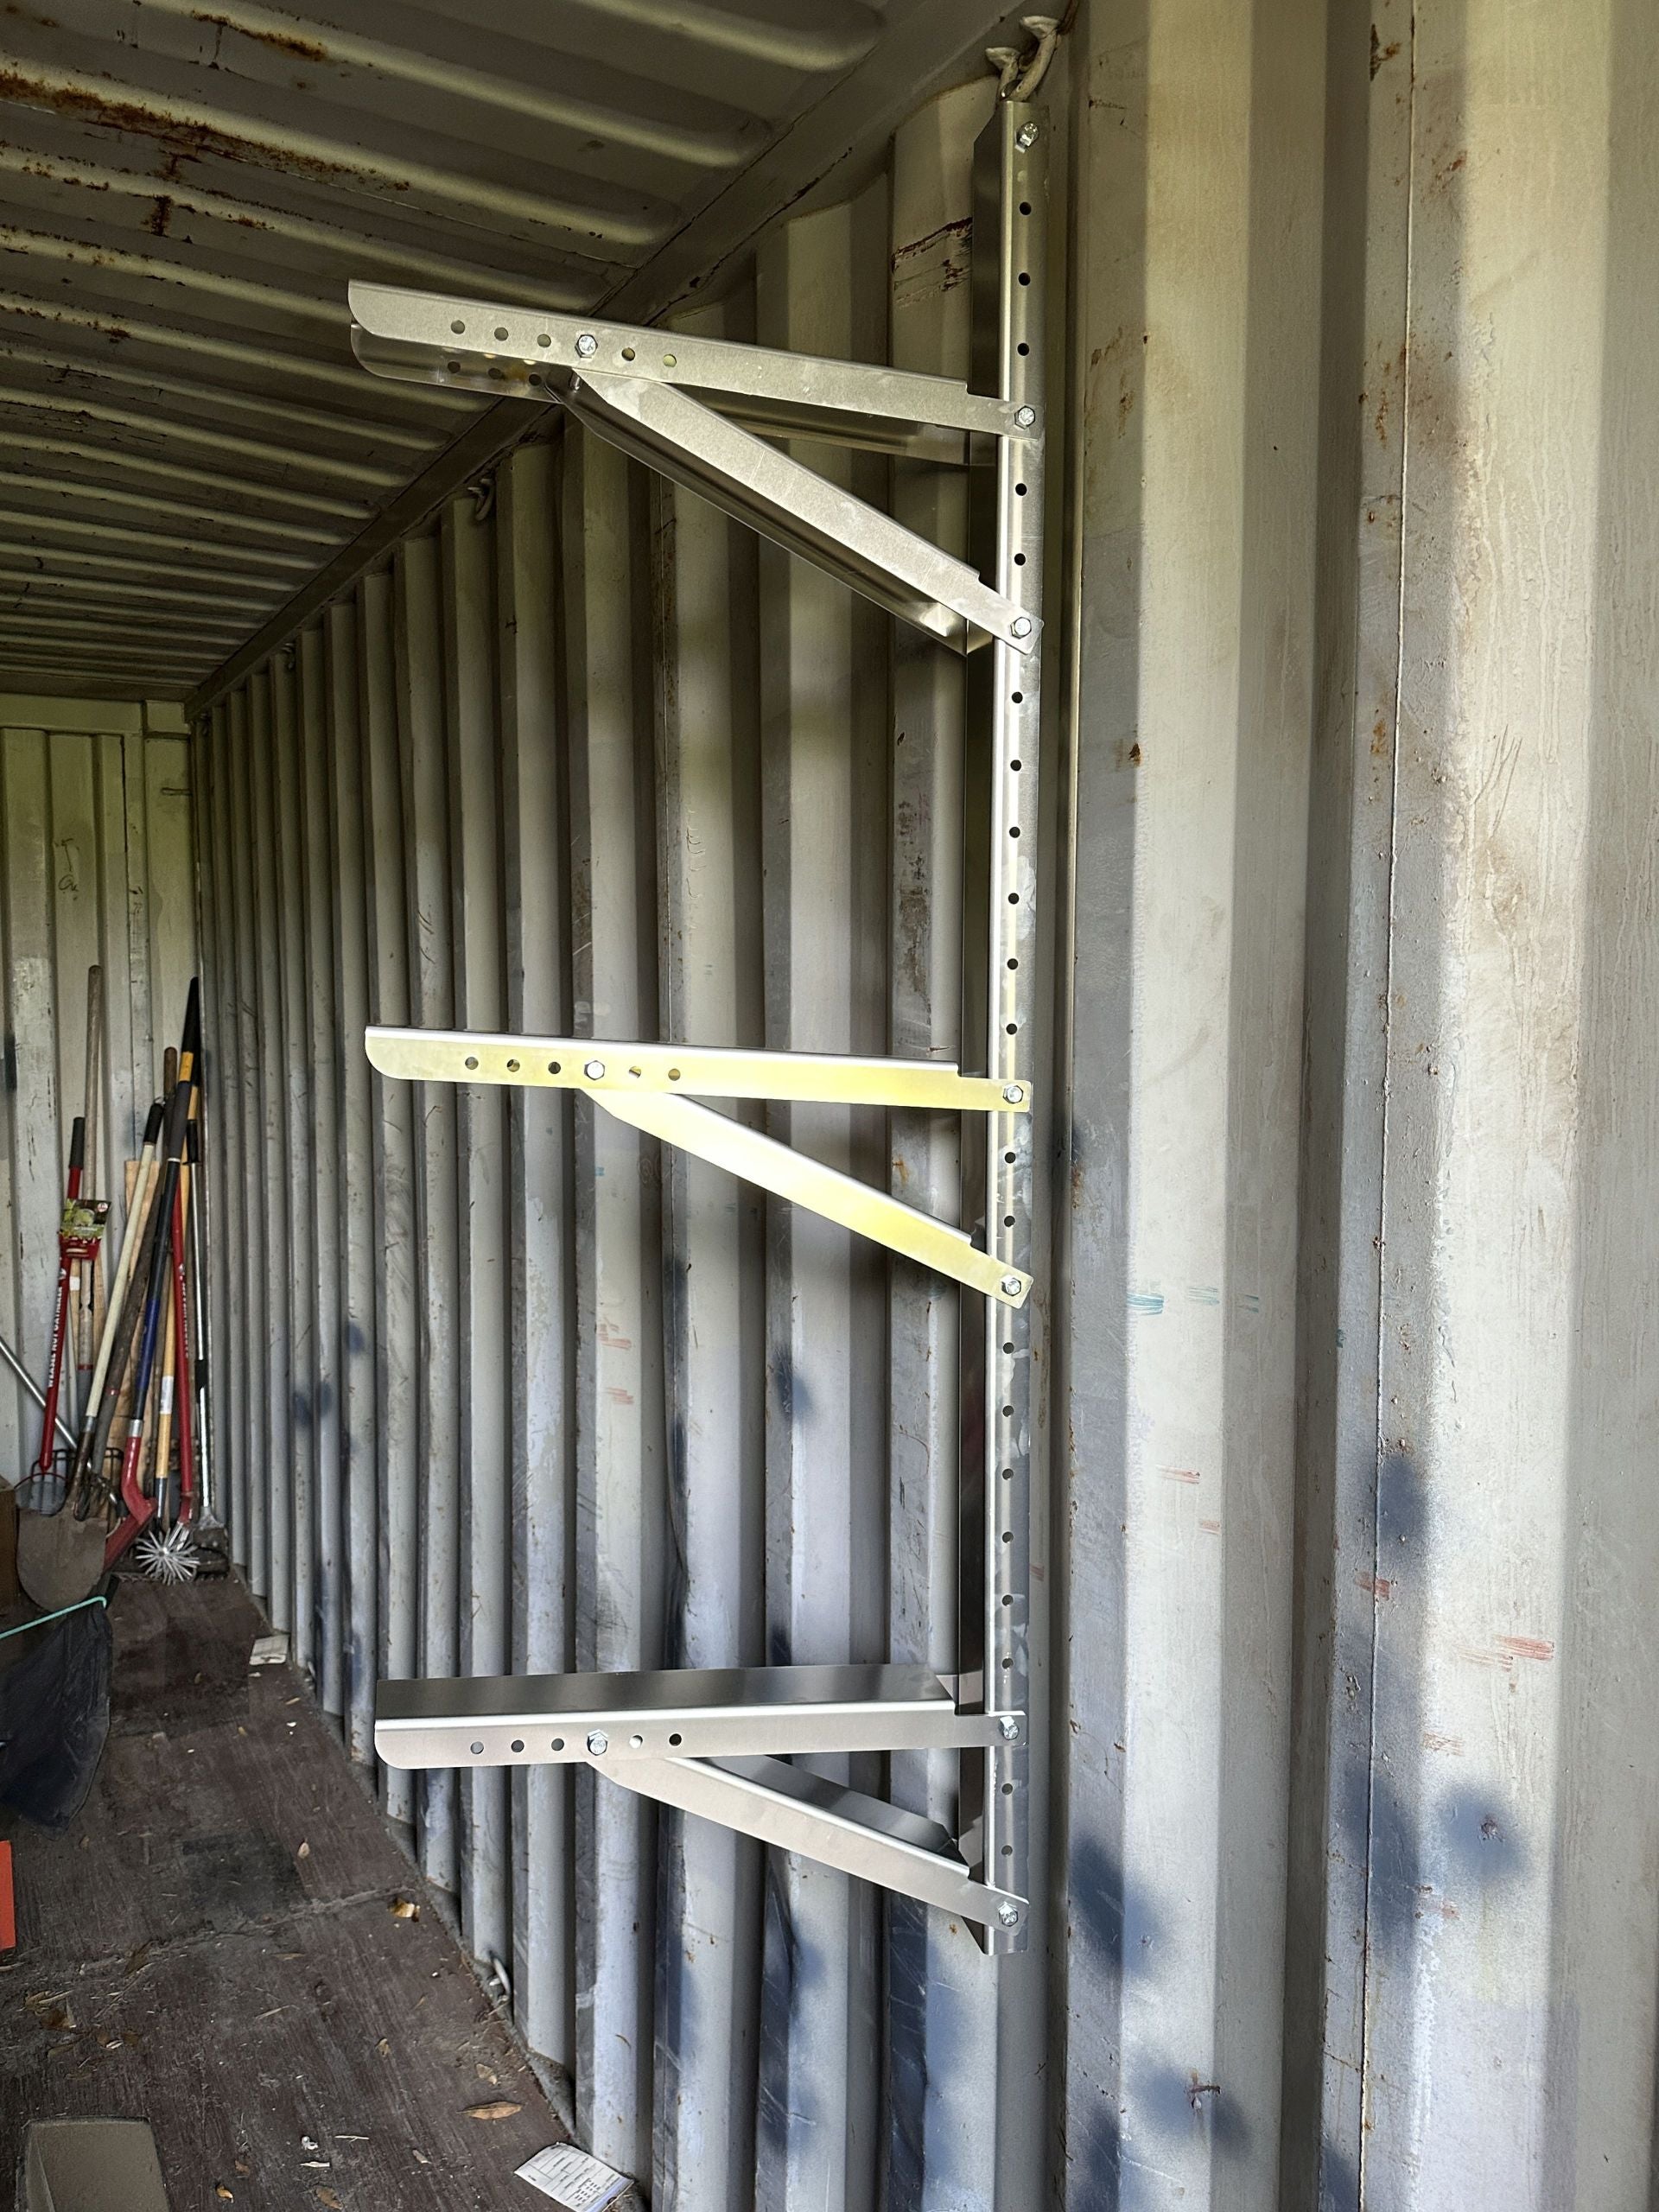 Shelves & Racks for Shipping Container Organization – Eagle Leasing